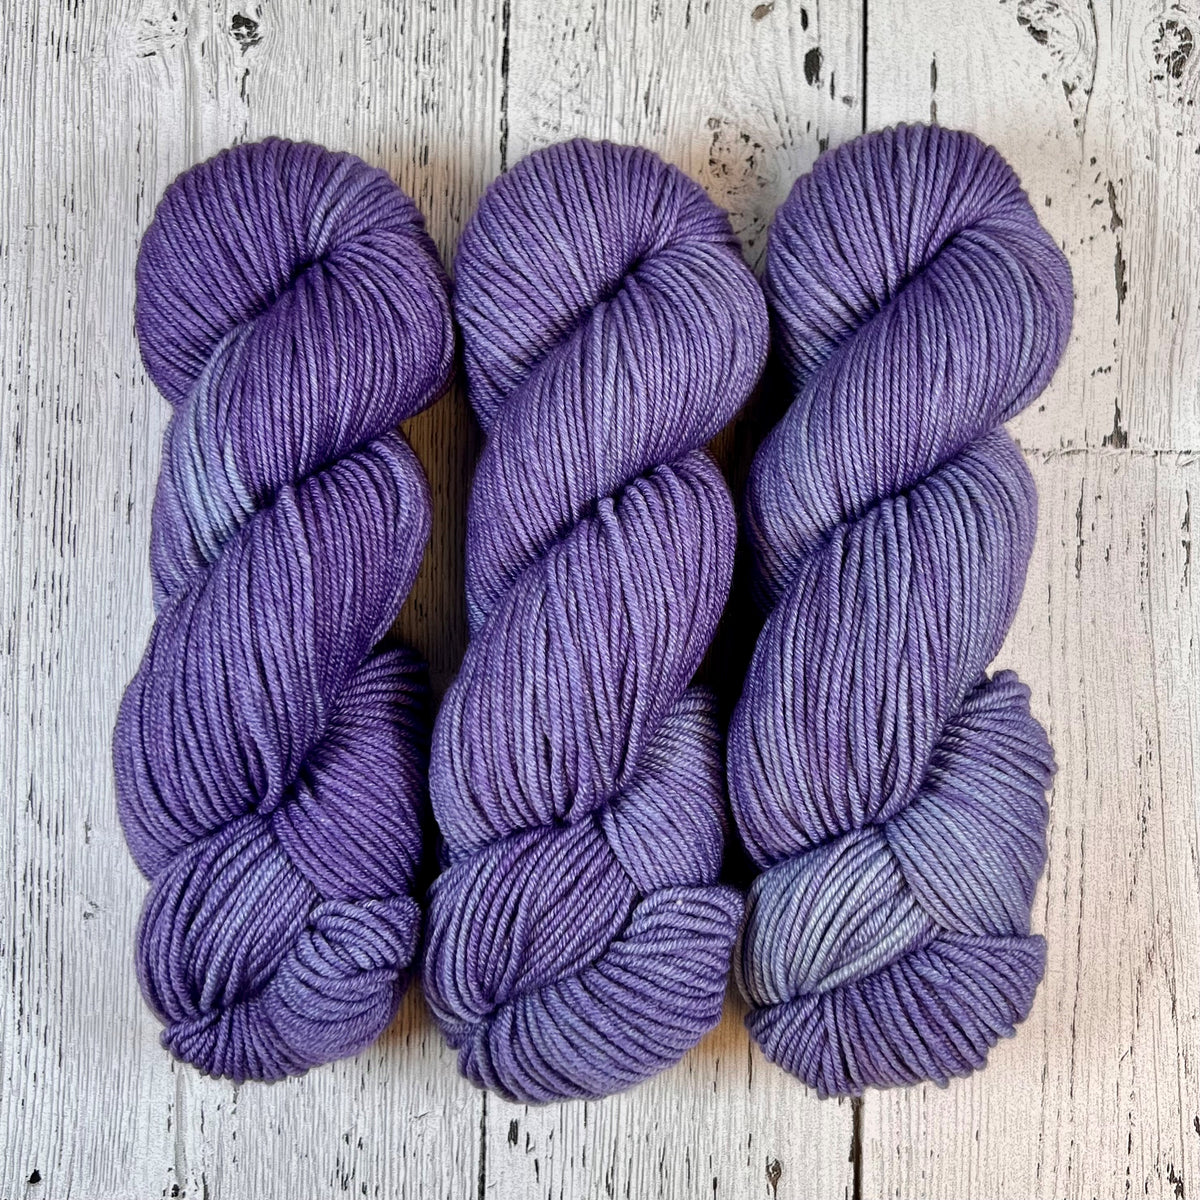 Spanish Lavender - Fioritura Worsted - Dyed Stock